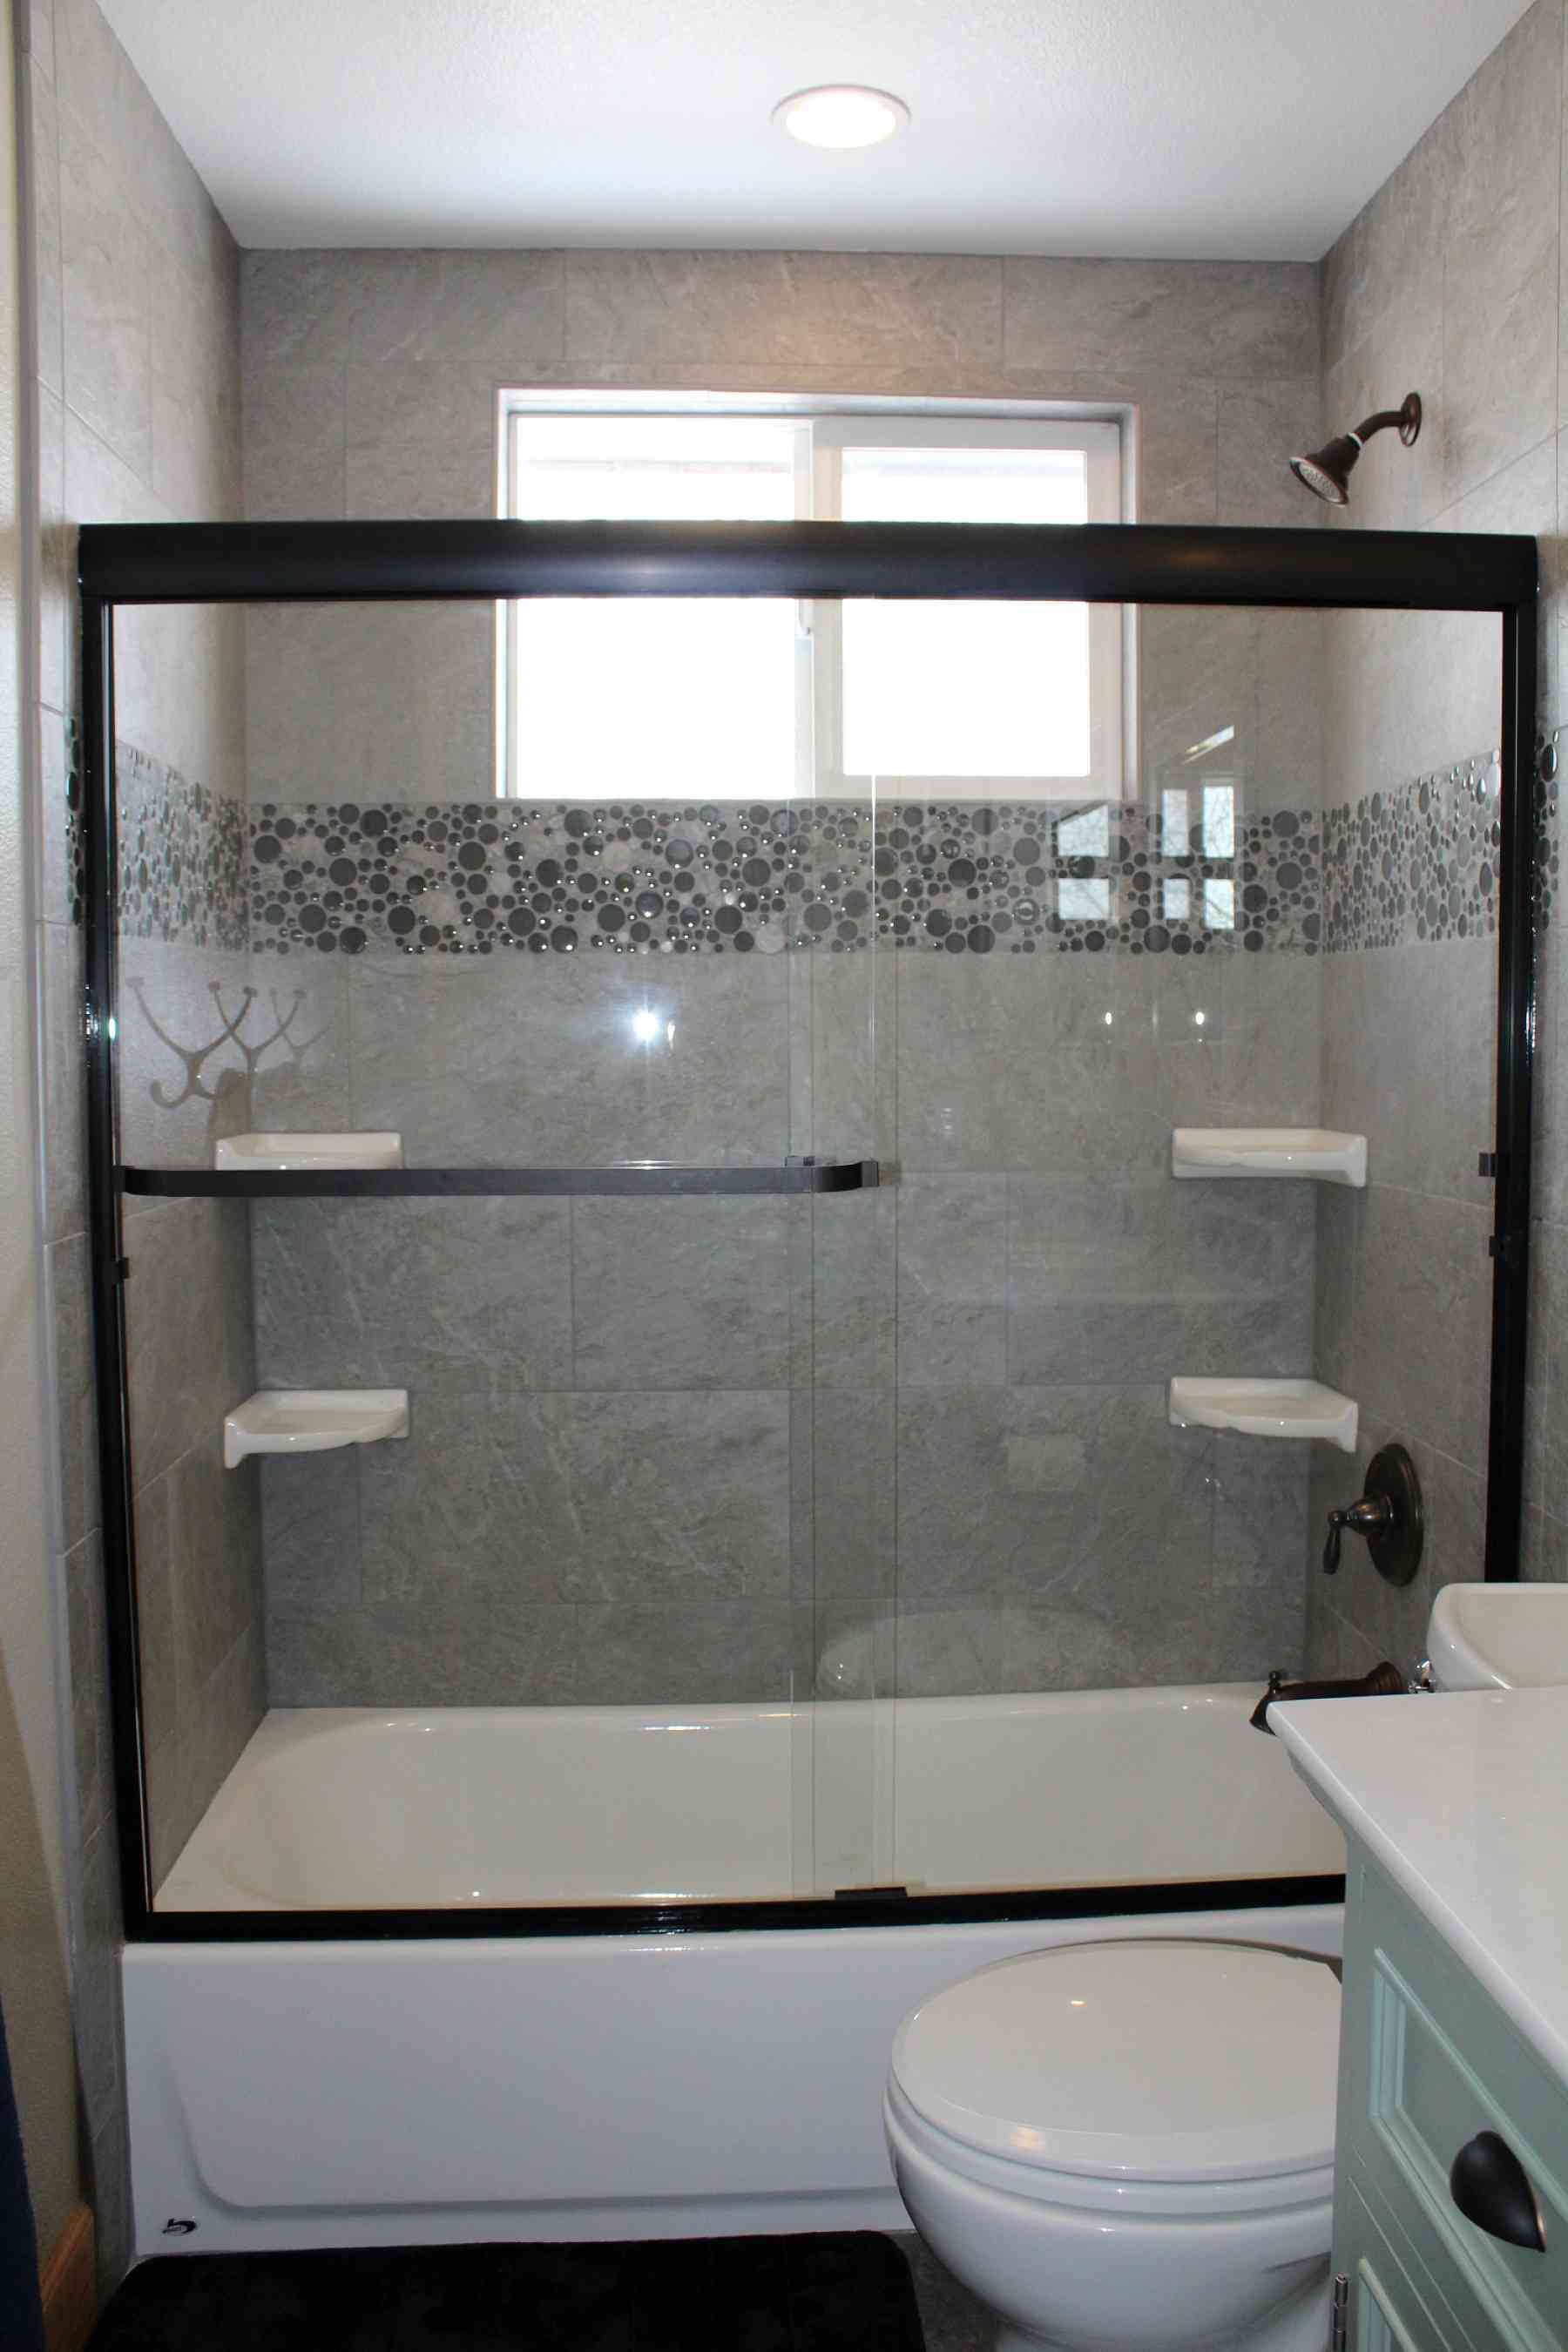 Beautiful new shower tile and sliding glass door!